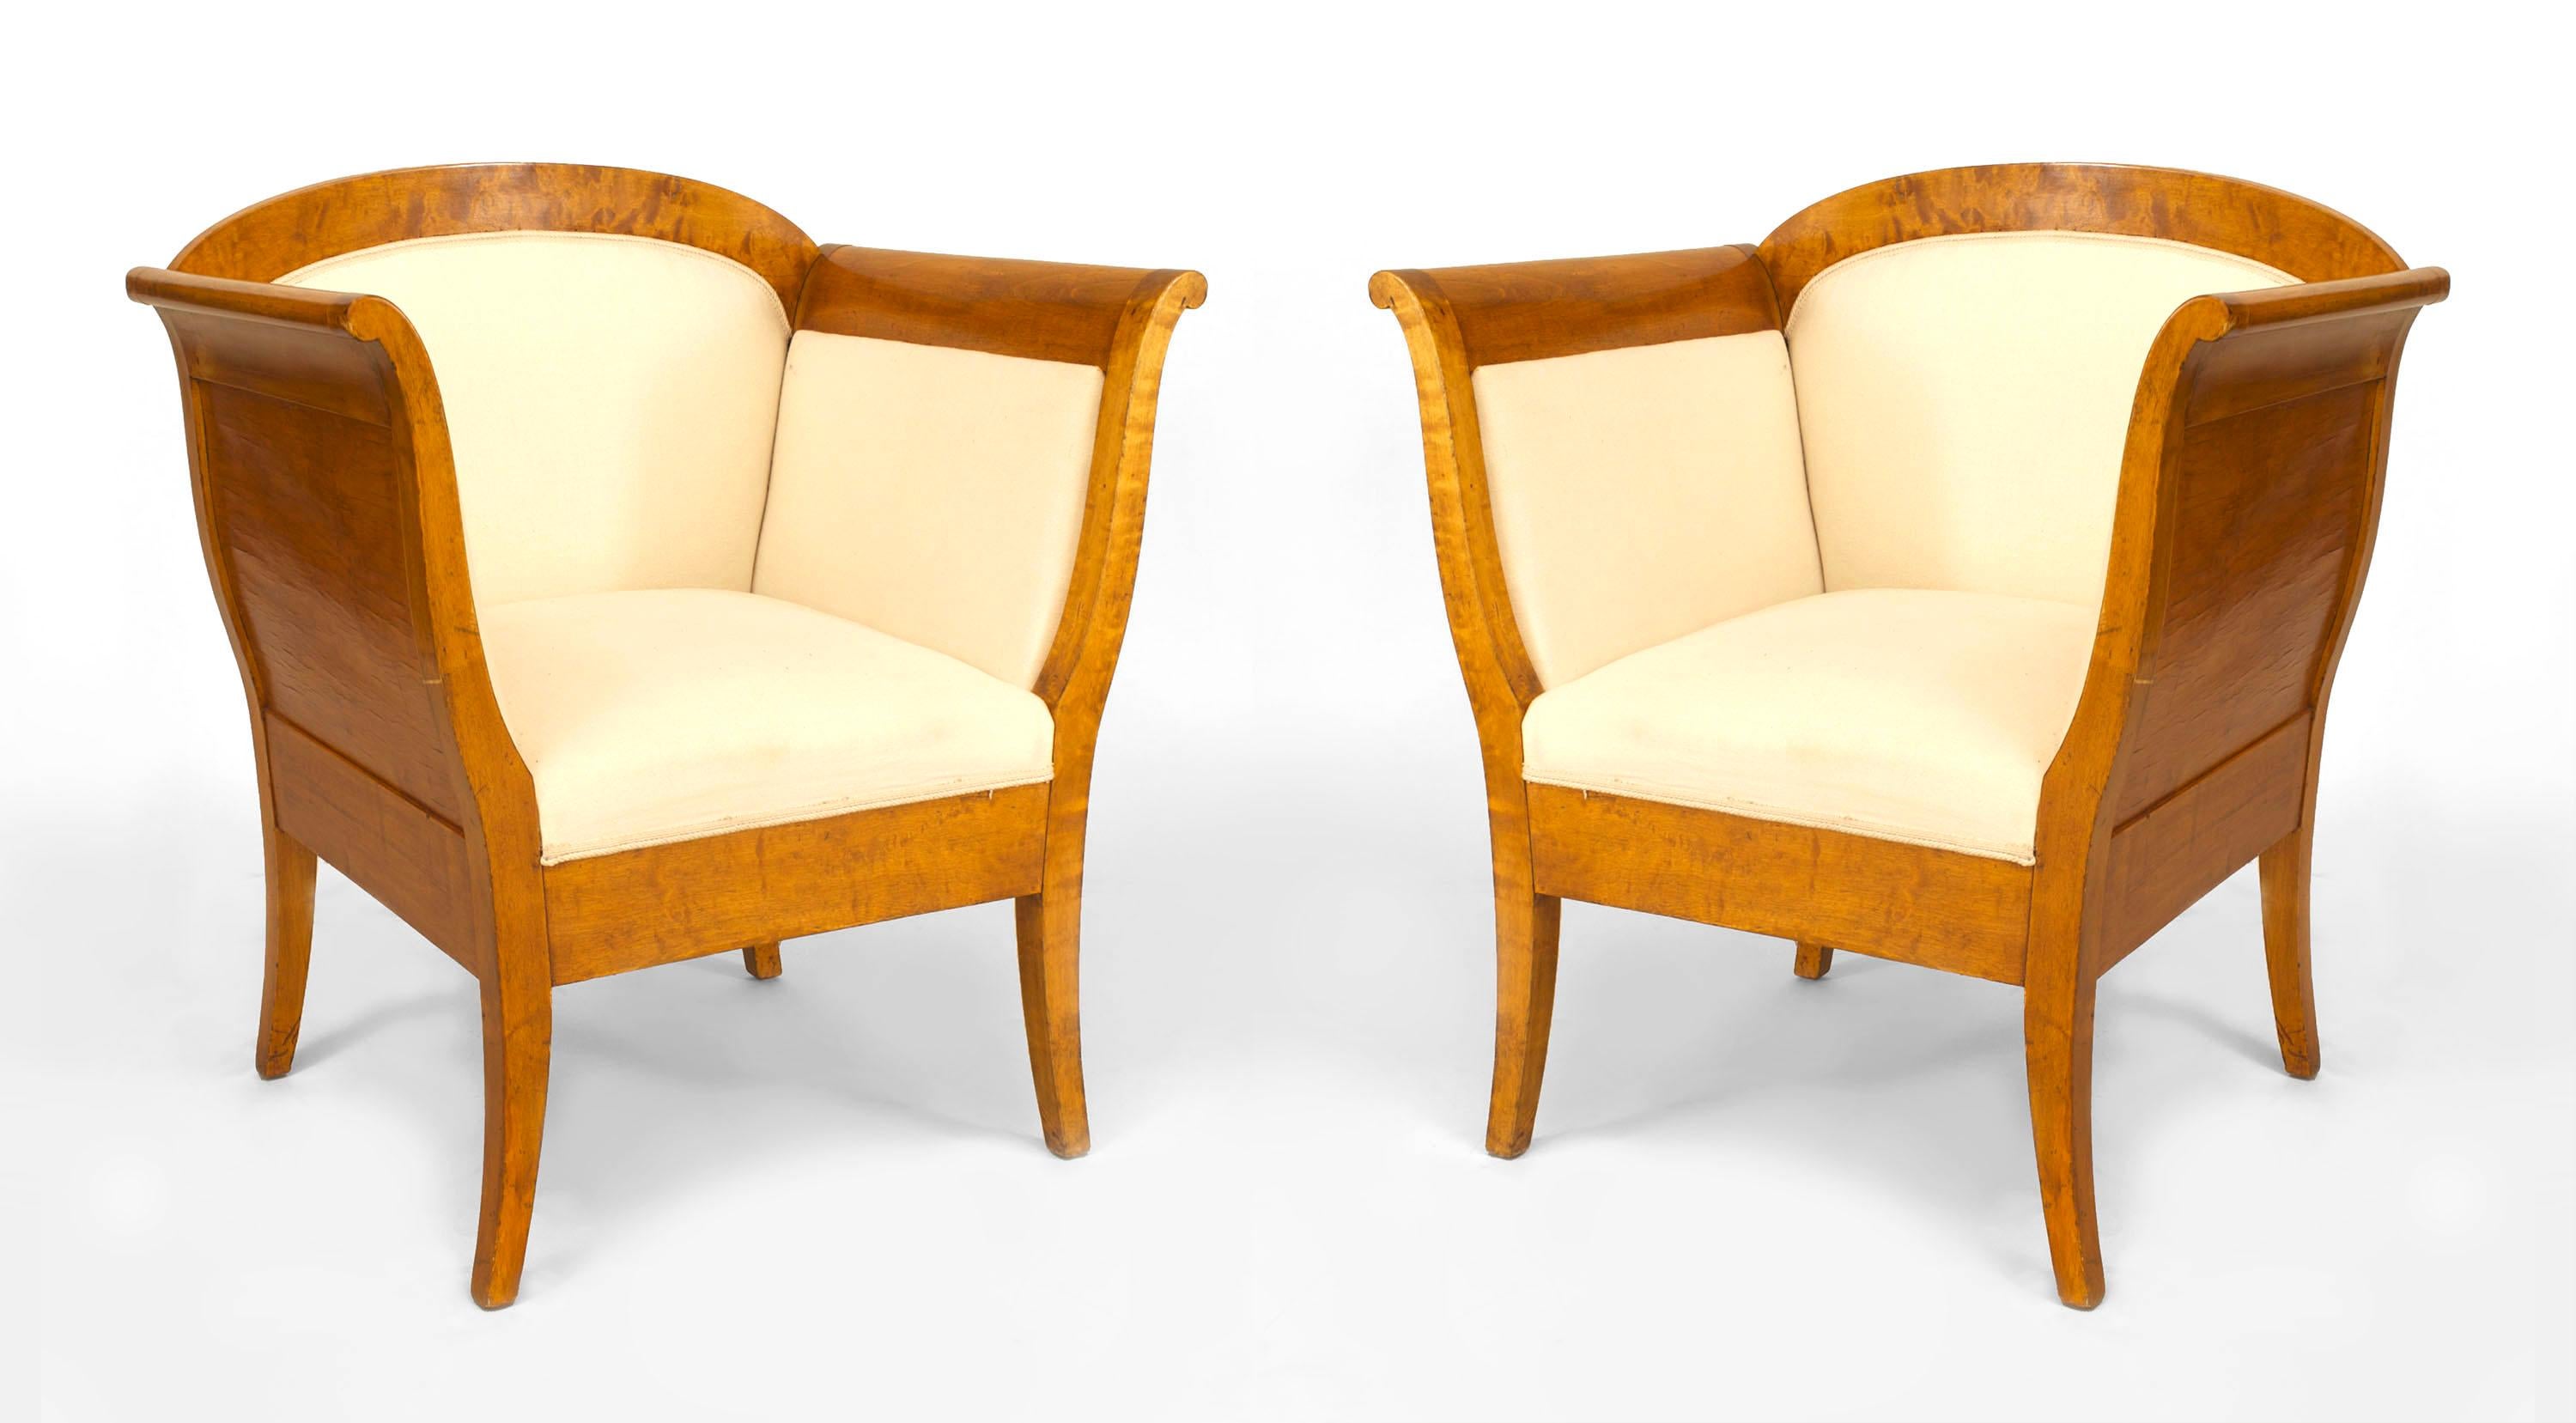 Pair of Swedish Biedermeier (1st Quarter 20th Century) birch bergeres / Armchairs with high flared arms and rounded back with white upholstery. (PRICED AS Pair)
